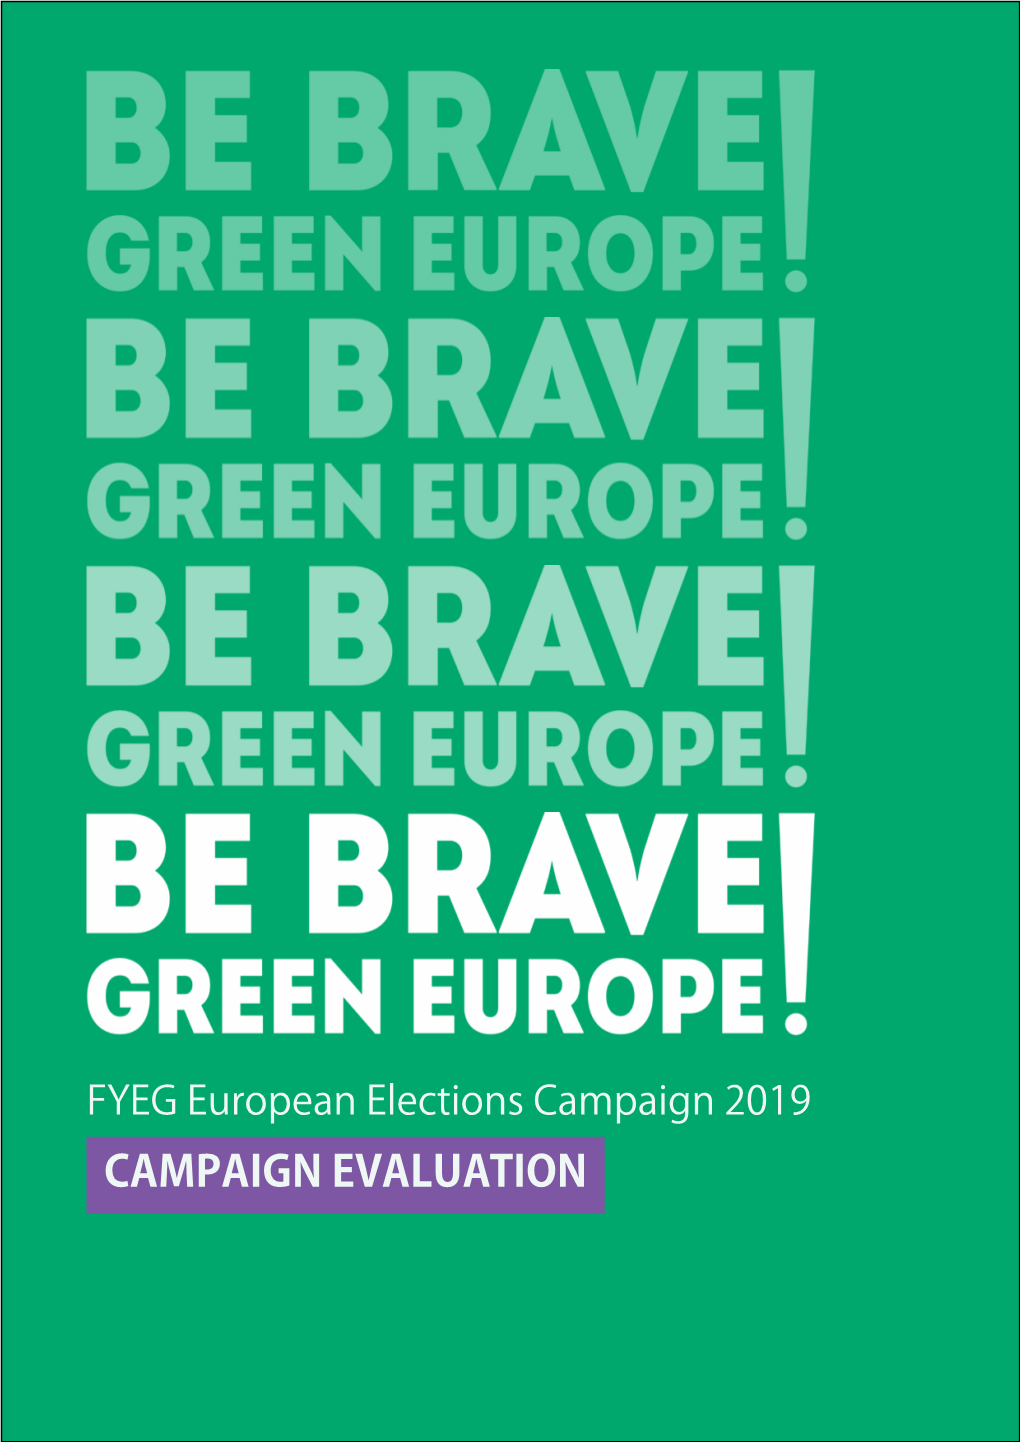 Download the Campaign Evaluation Report